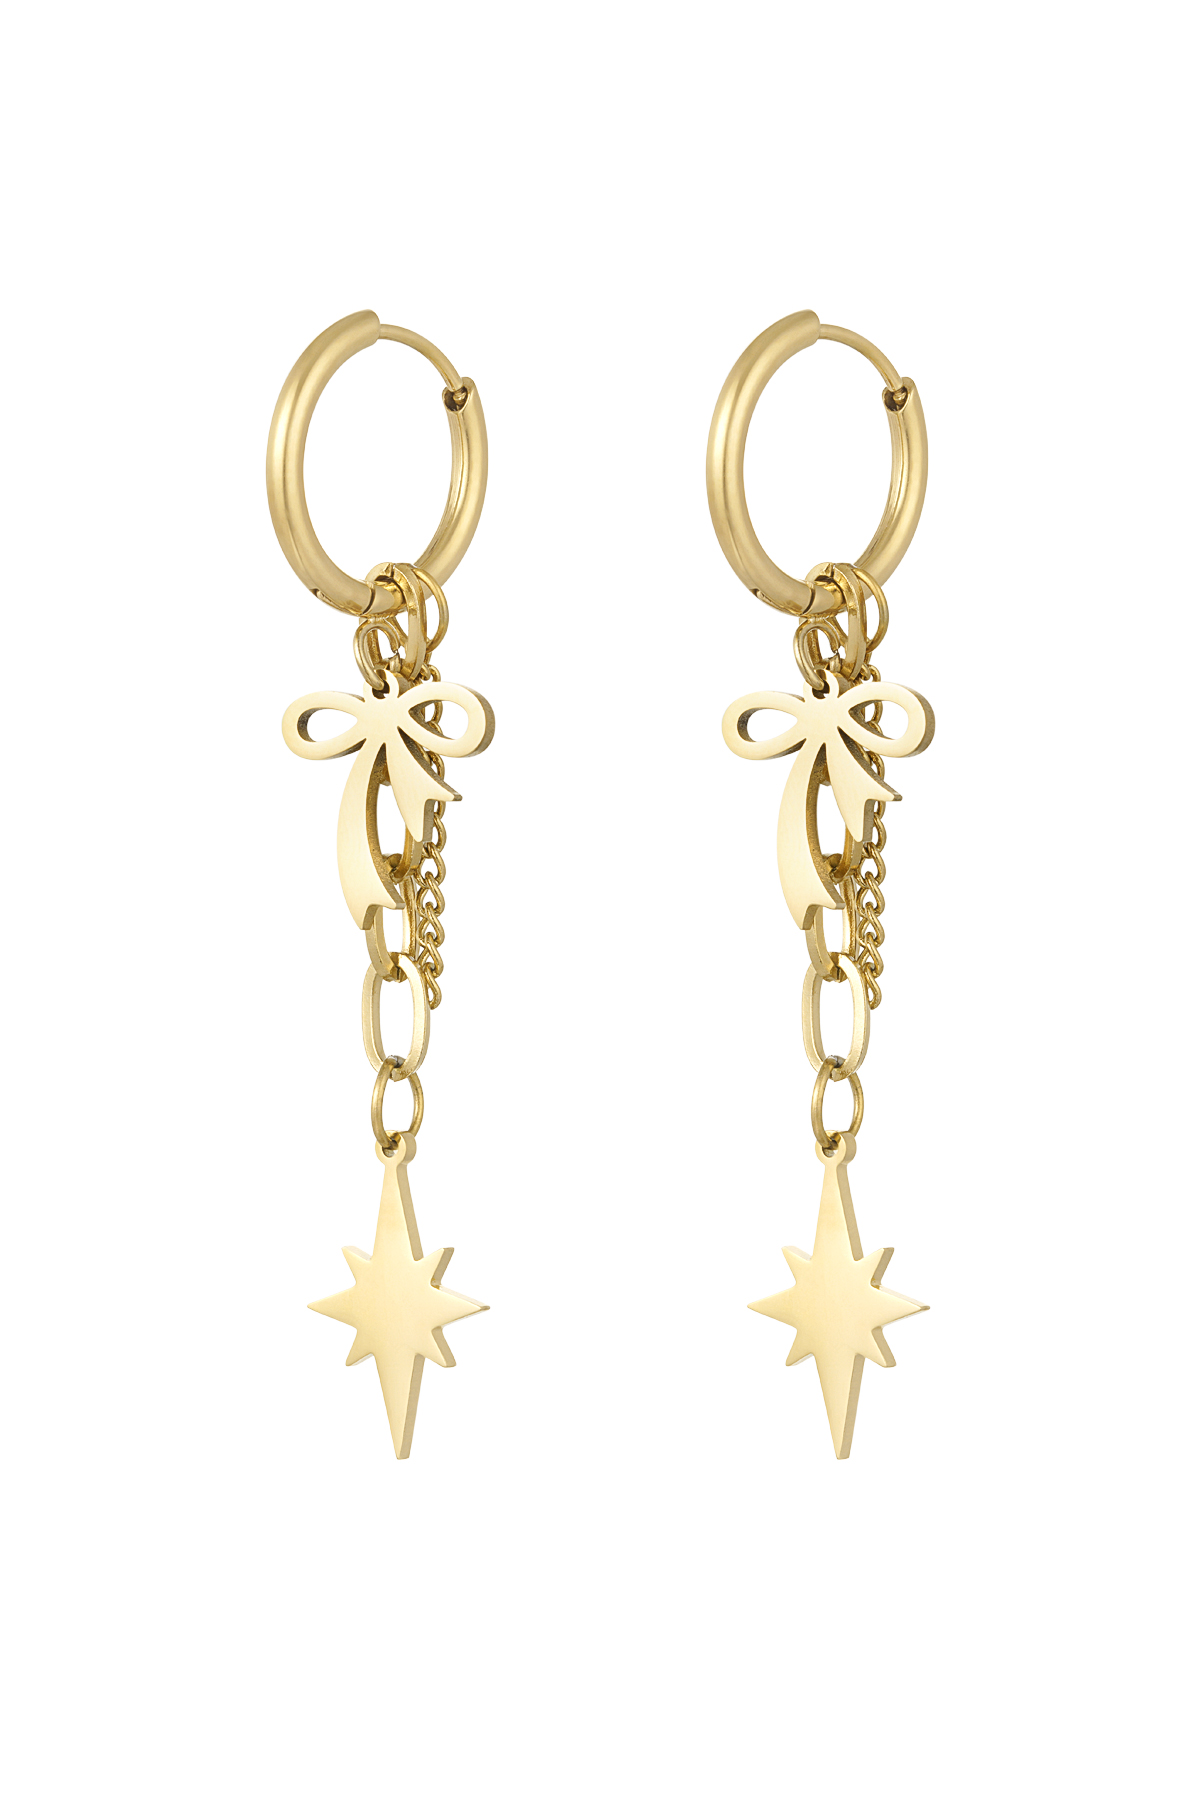 Earrings bows day - gold